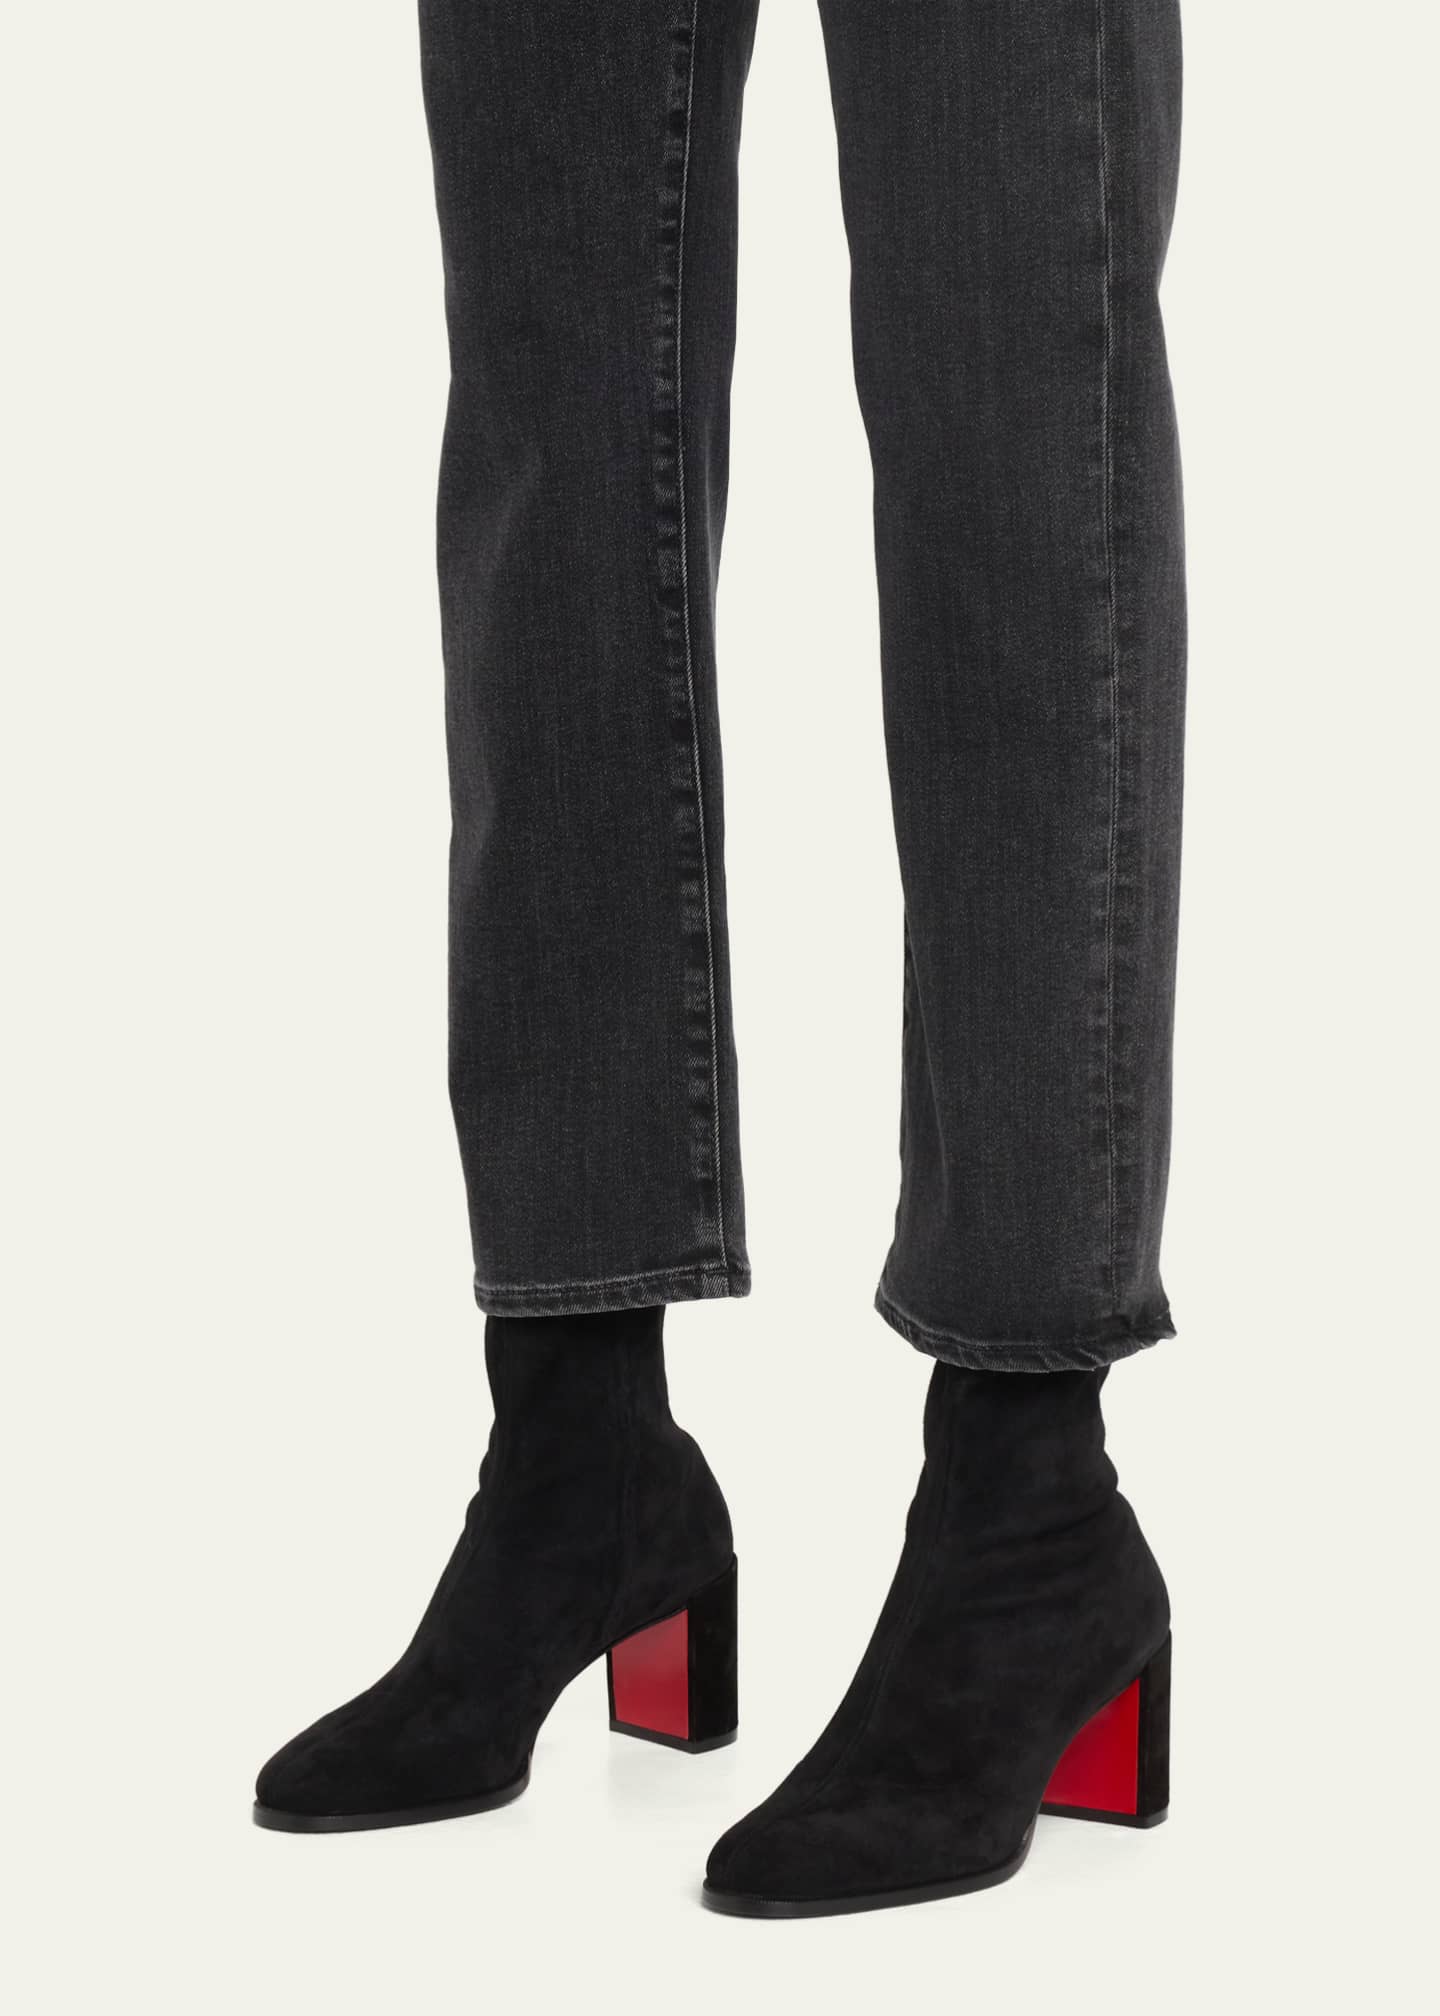 Christian Louboutin Adoxa Stretch Suede Red-Sole Booties - Bergdorf Goodman